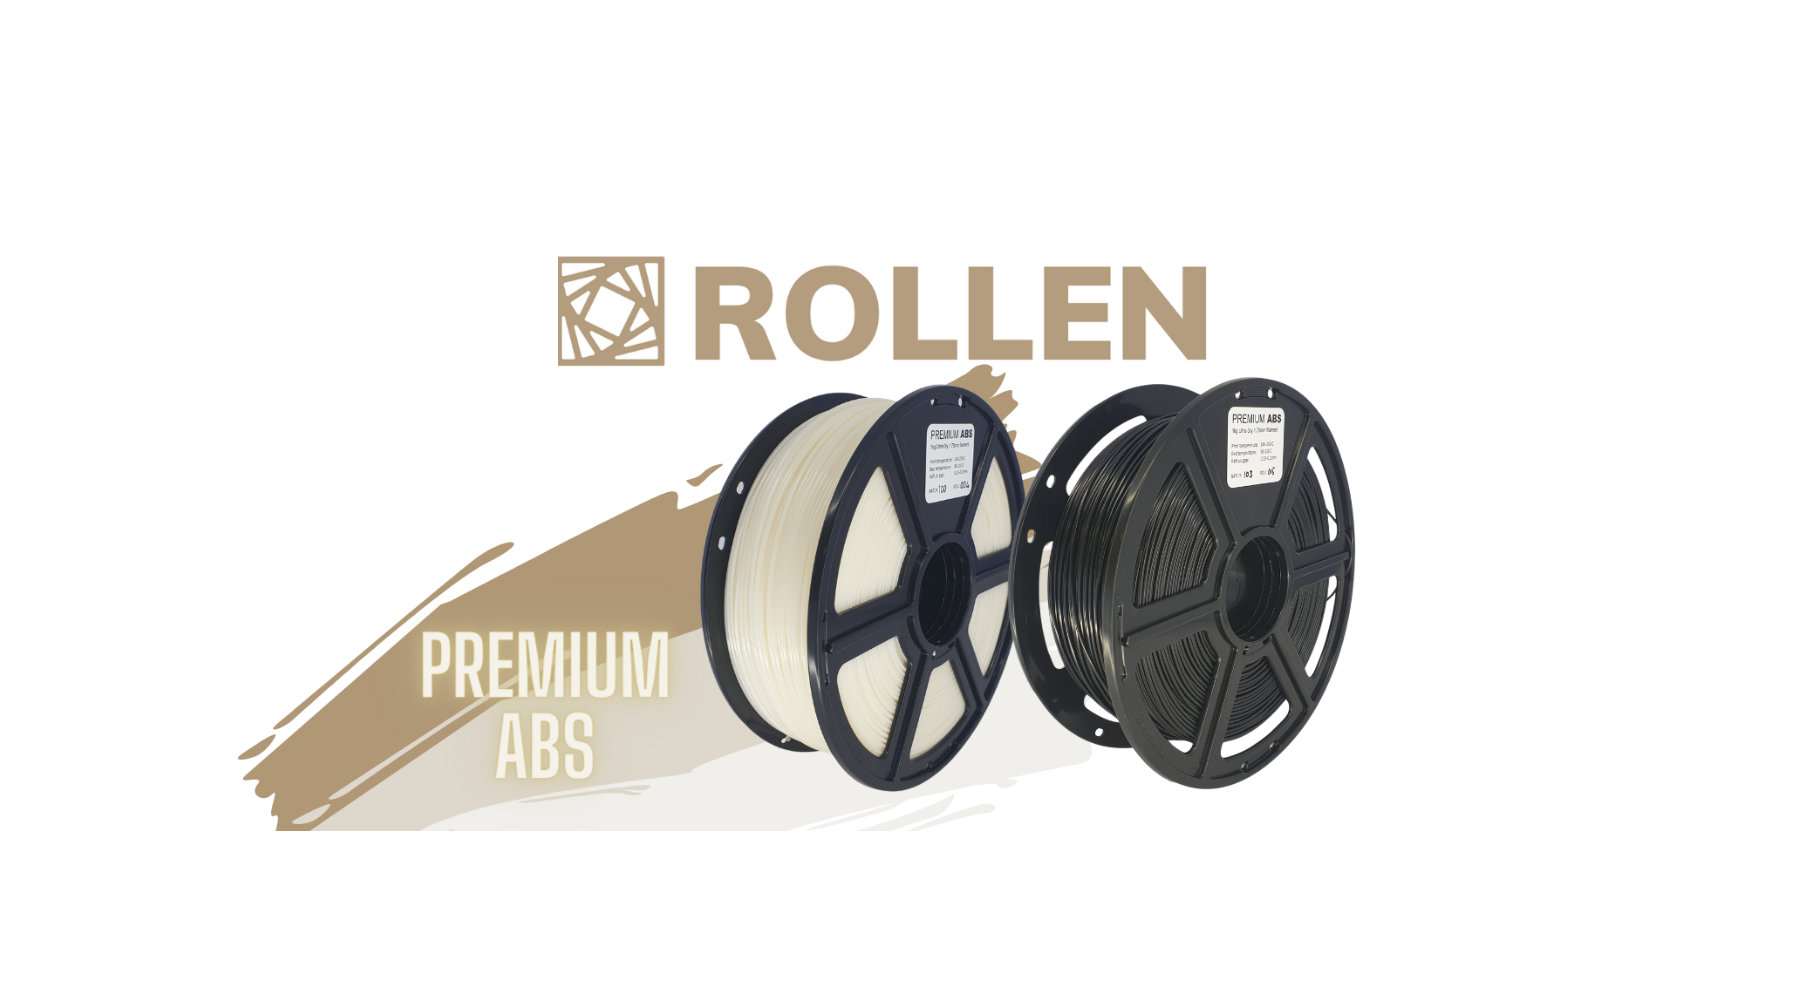 WHO IS ROLLEN FILAMENT?